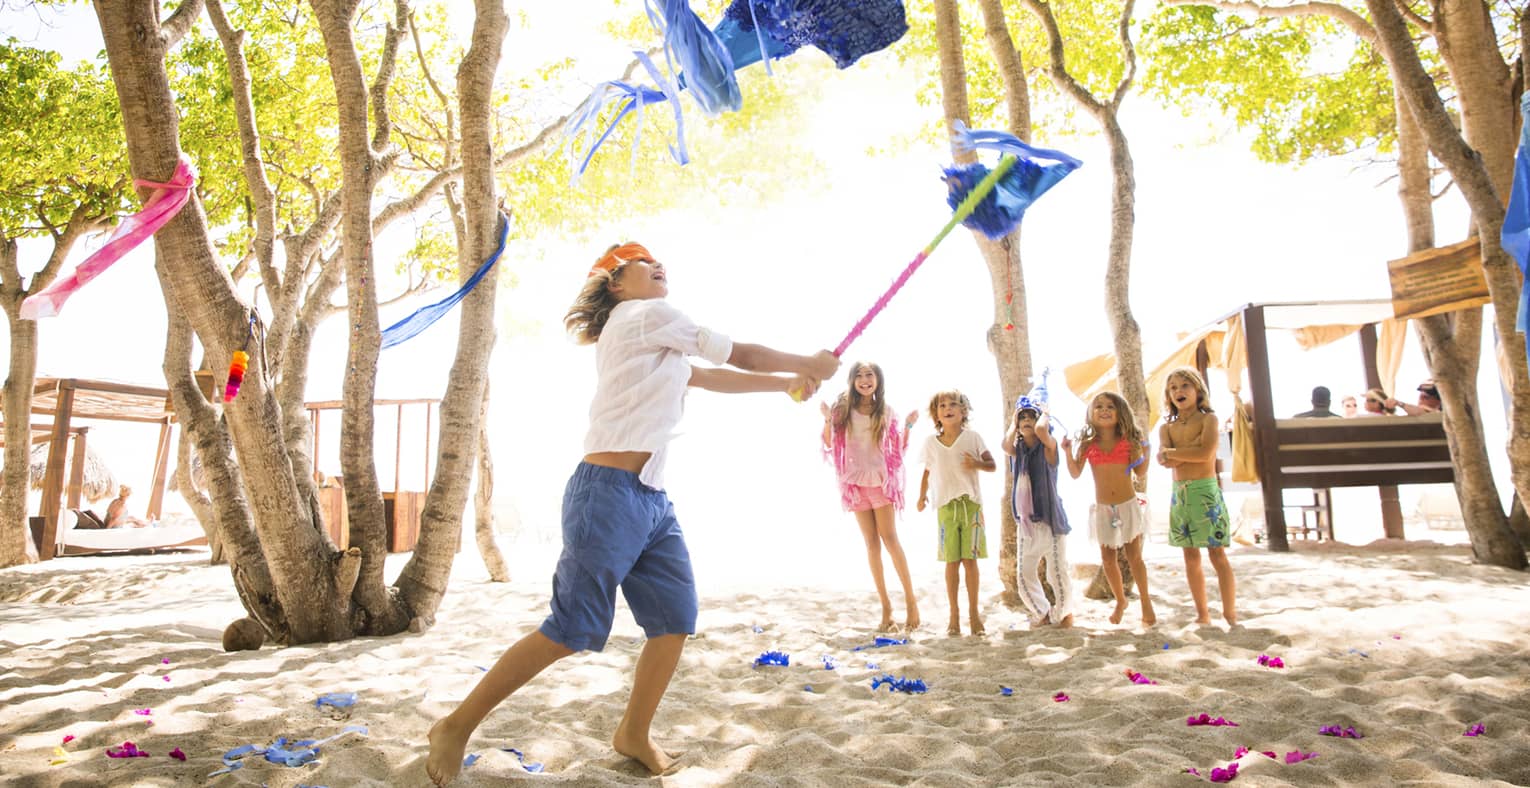 Boy wearing orange blindfold swings stick at blue pinata on beach while five young children cheer him on